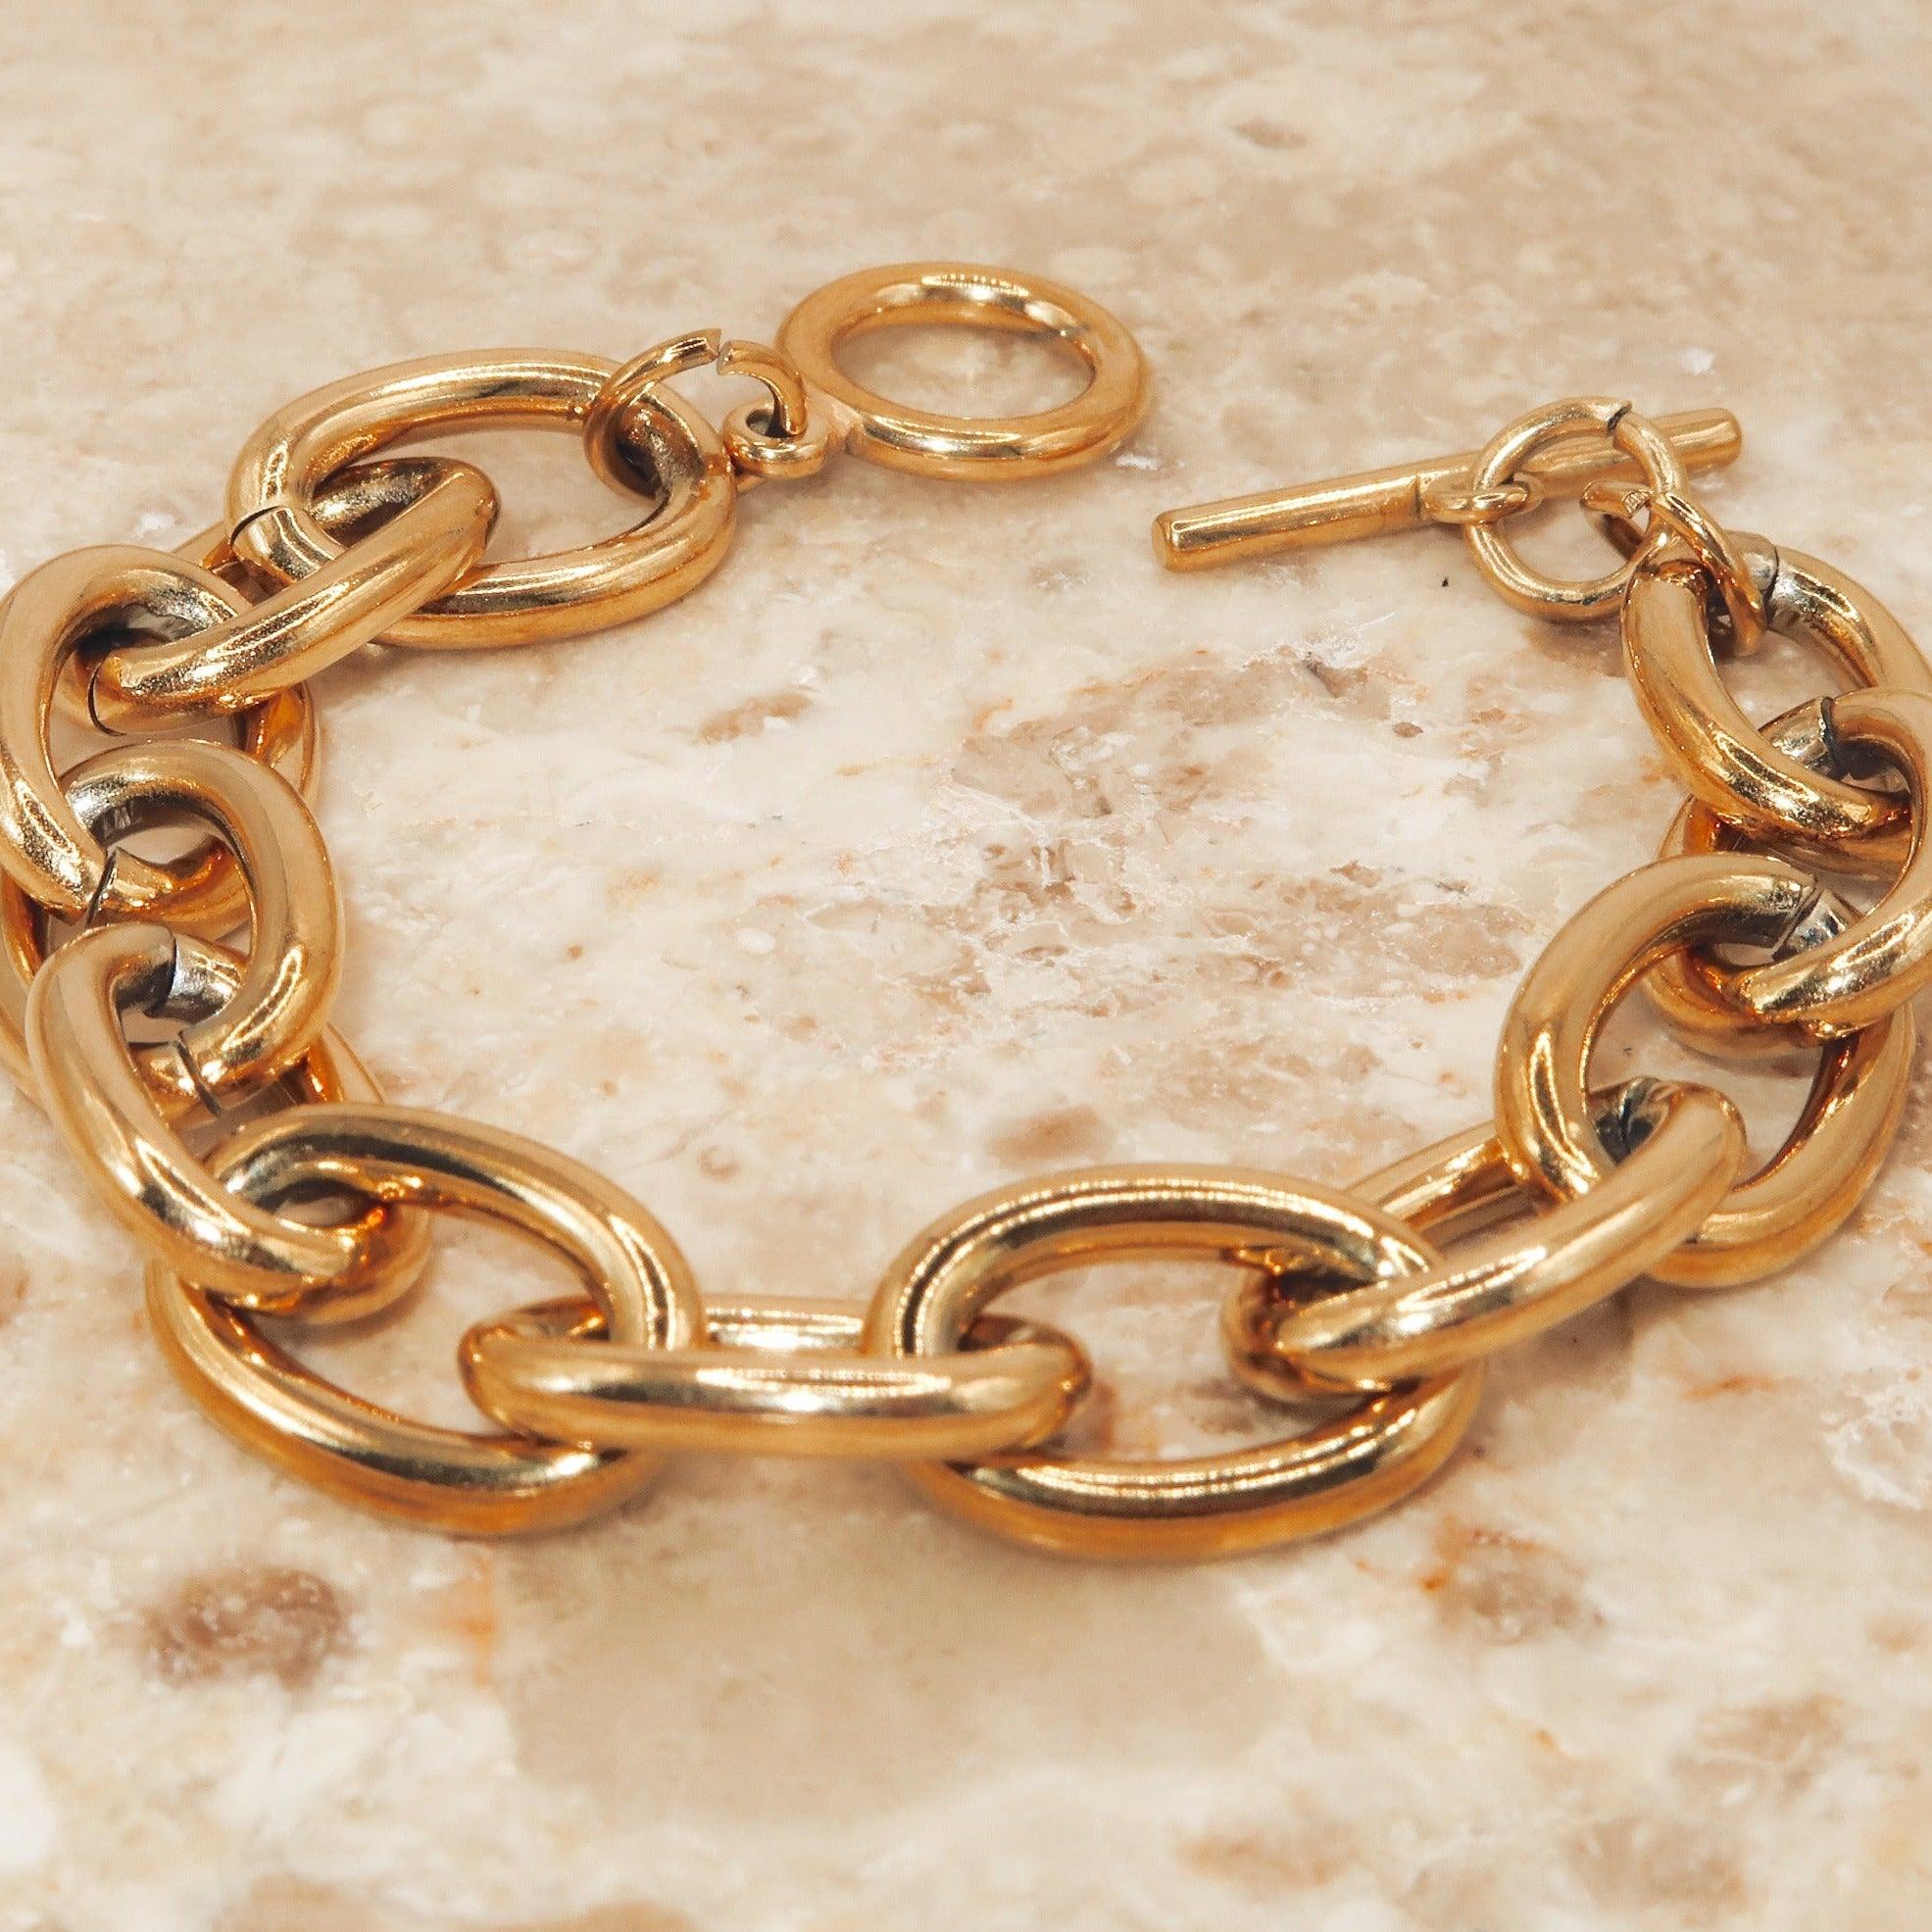 VICTORIA - 18K PVD Gold Plated Chunky Link Chain Bracelet - Mixed Metals